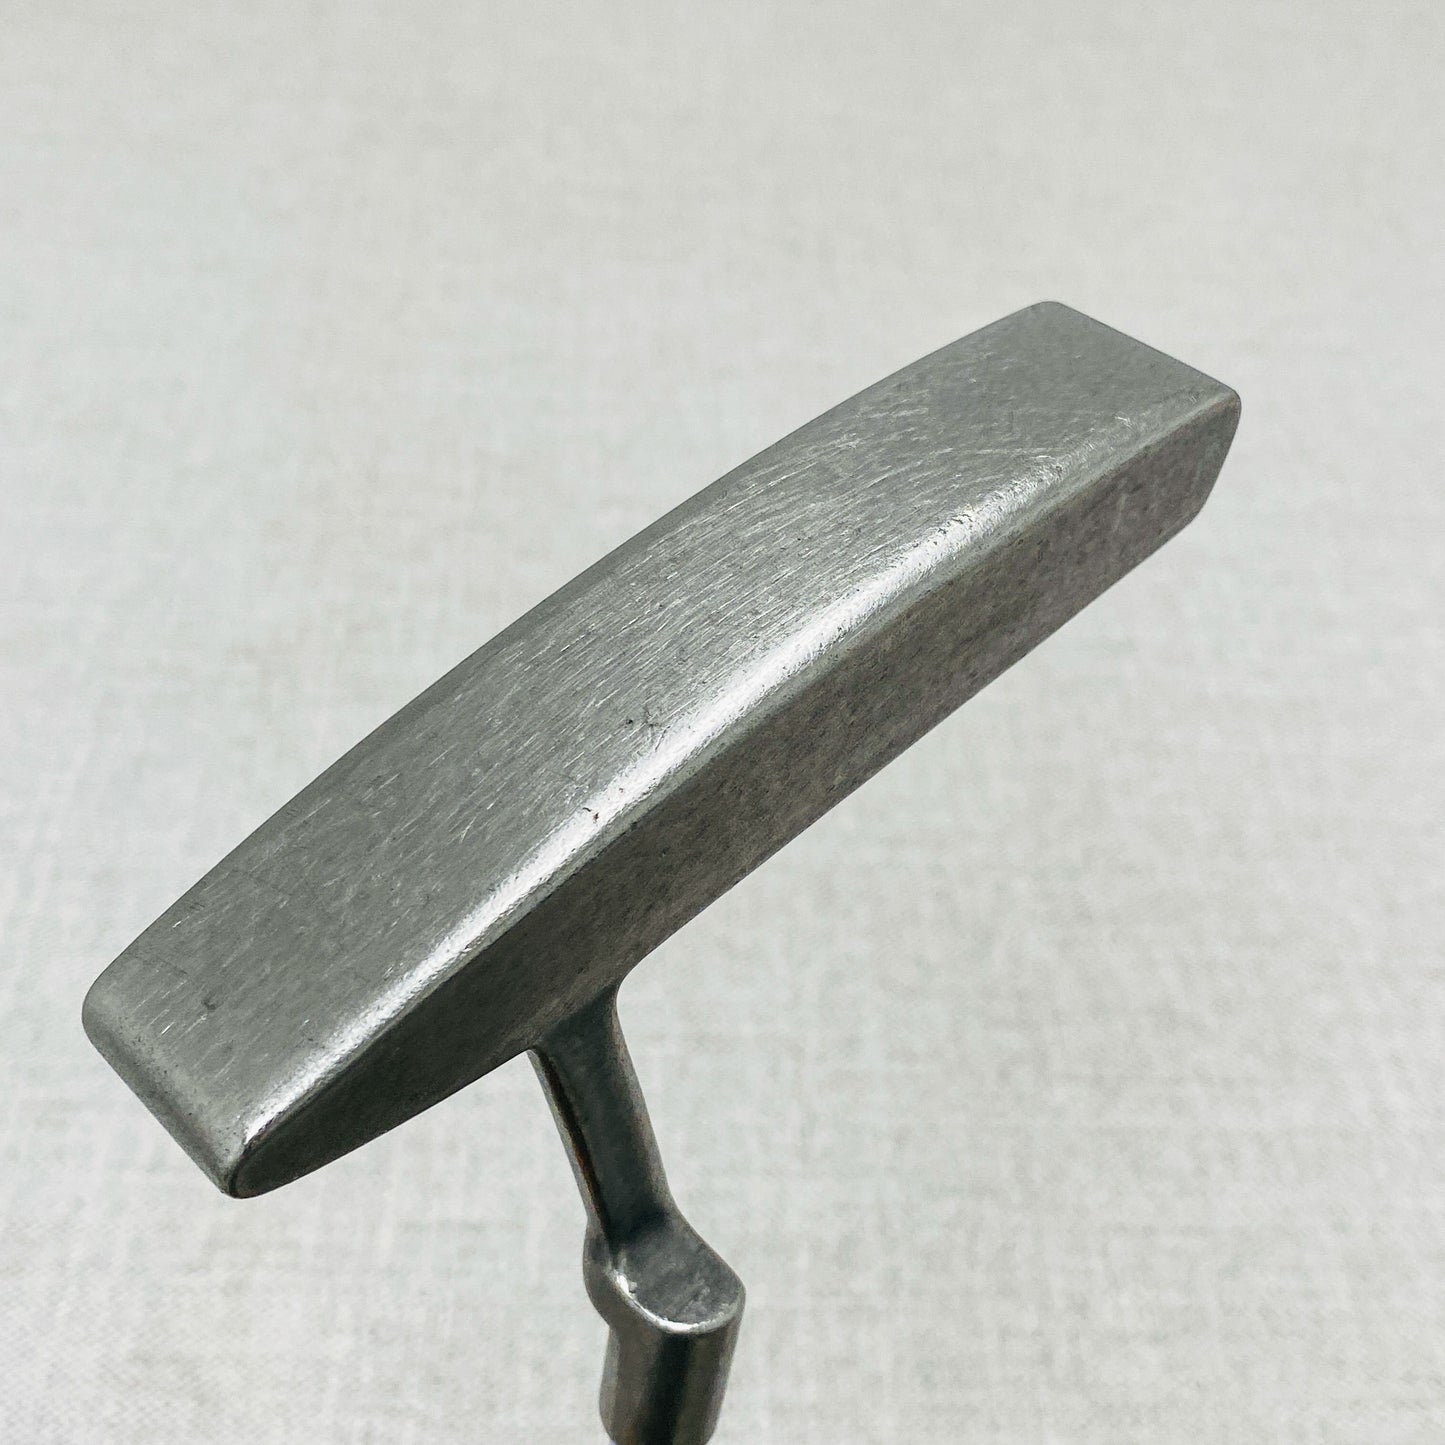 PING Pal 4 Stainless Putter. 35 inch - Very Good Condition # T1011